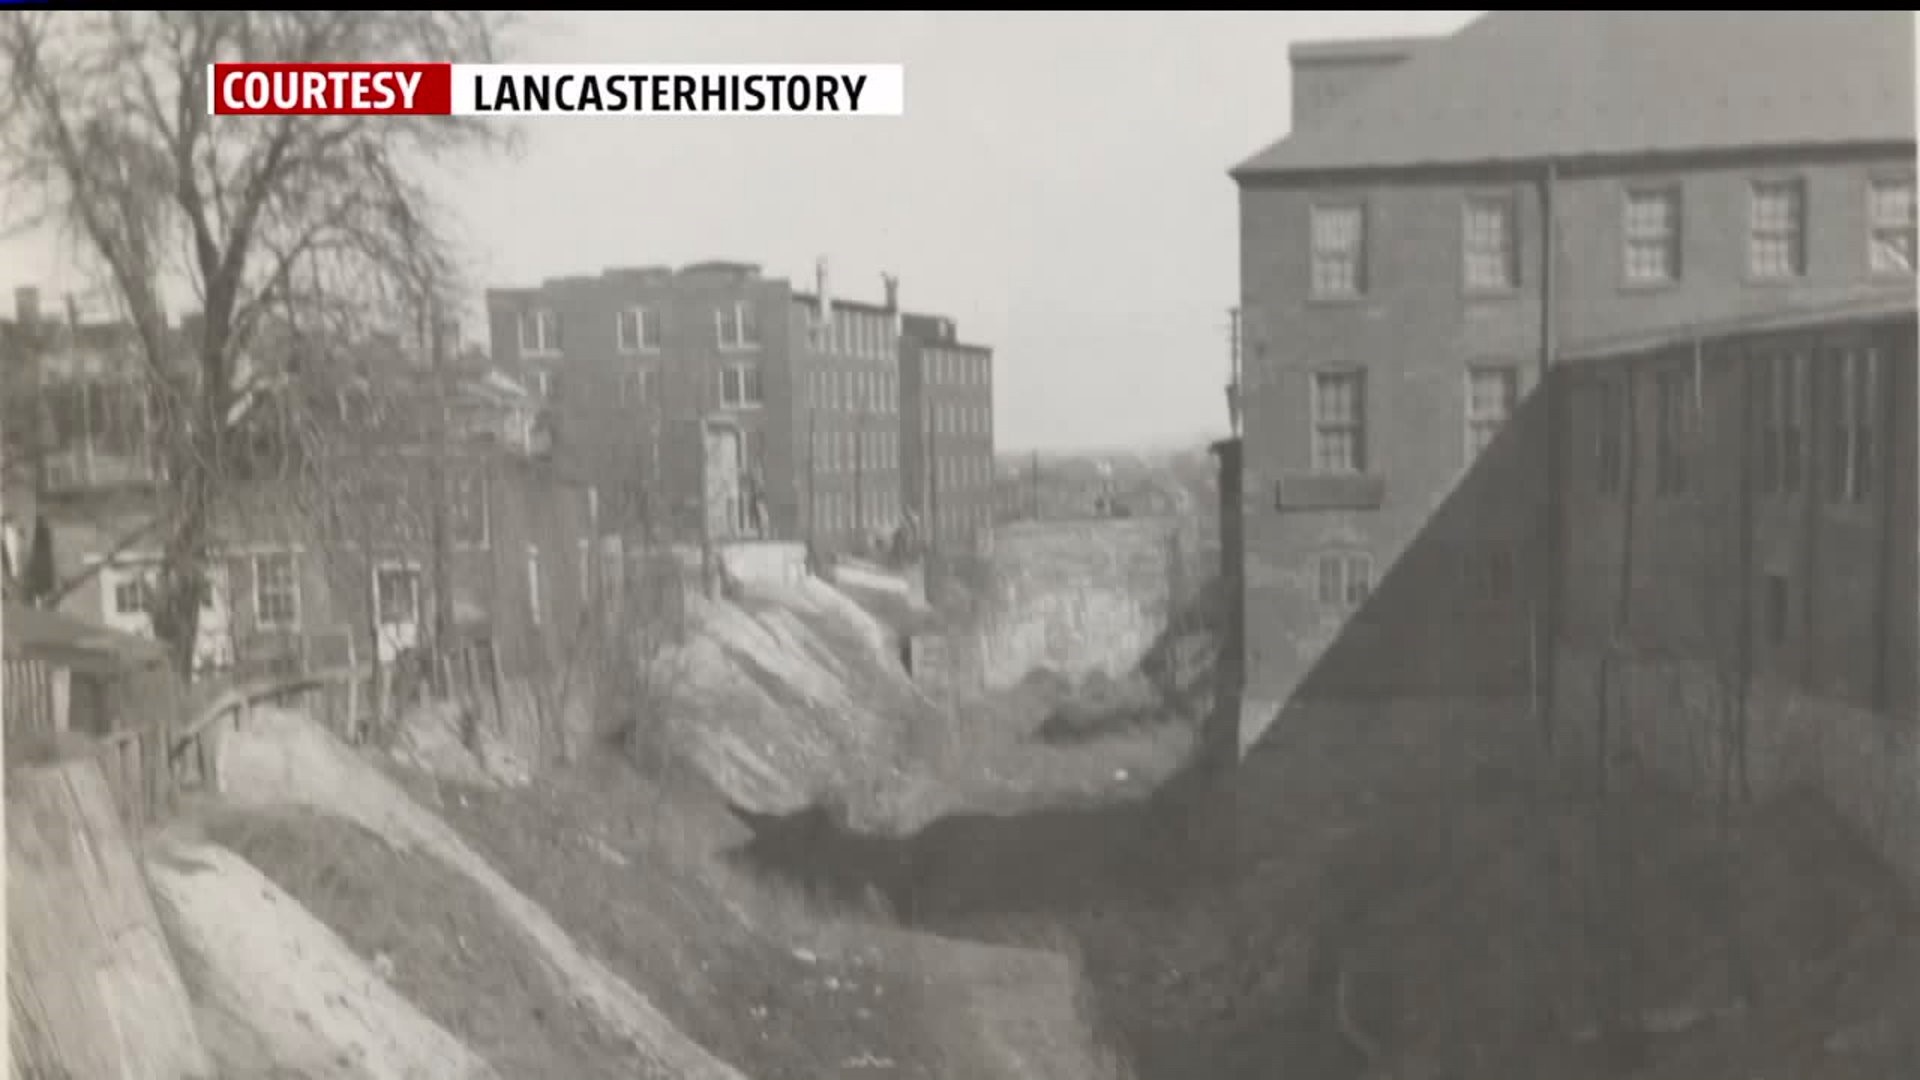 Old railroad bridge and cavern discovered beneath busy road in Lancaster